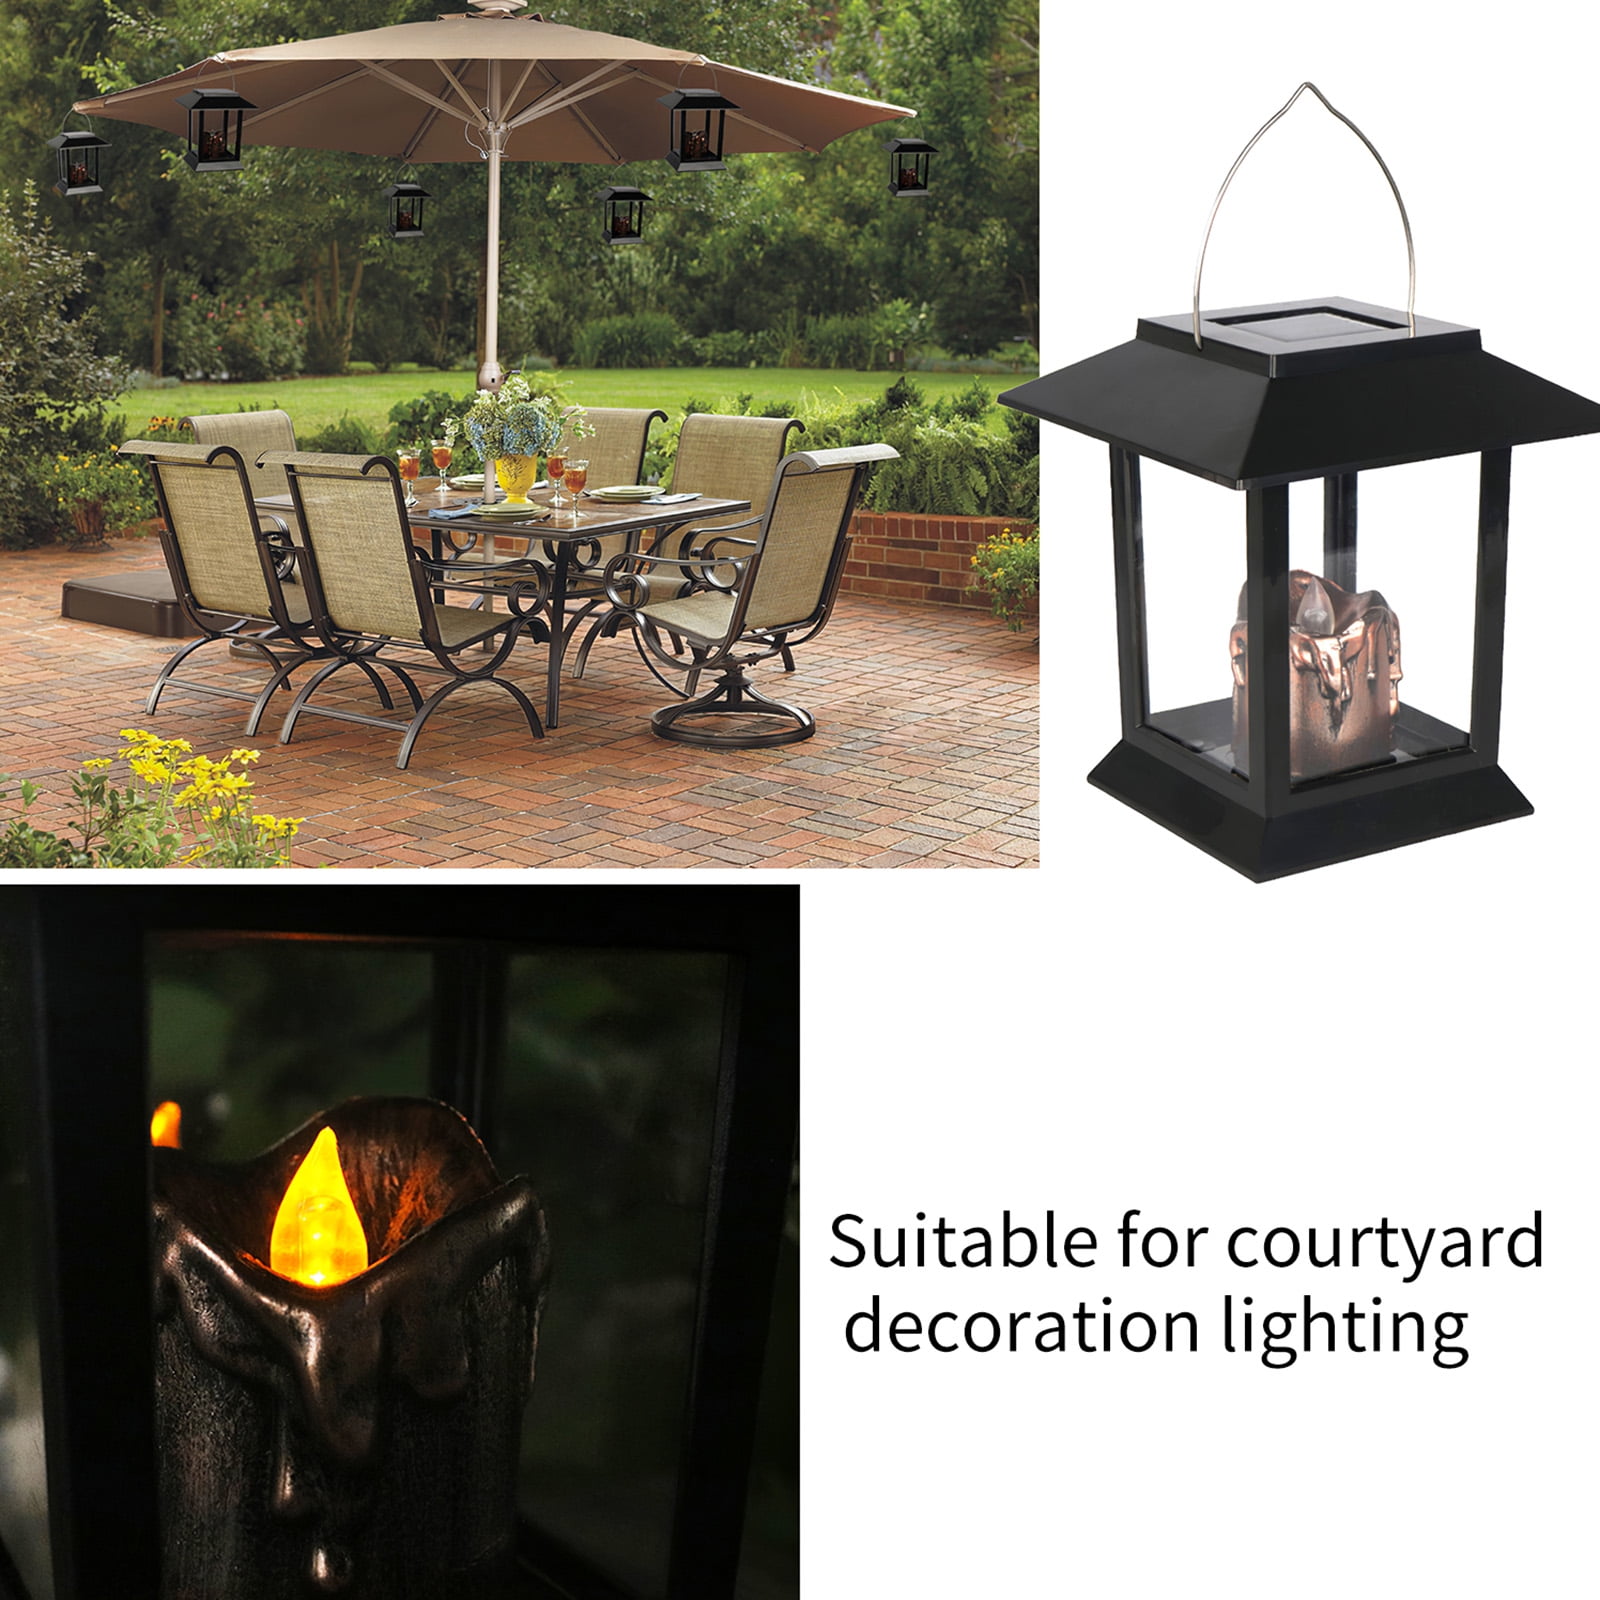 FomaTrade LED Solar Mission Lantern Pack of 6 Vintage Waterproof Umbrella Lantern Led Candle Lights with Clamp for Beach Umbrella Tree Pavilion Garden Yard Lawn Outdoor Warm Light Candle 2 